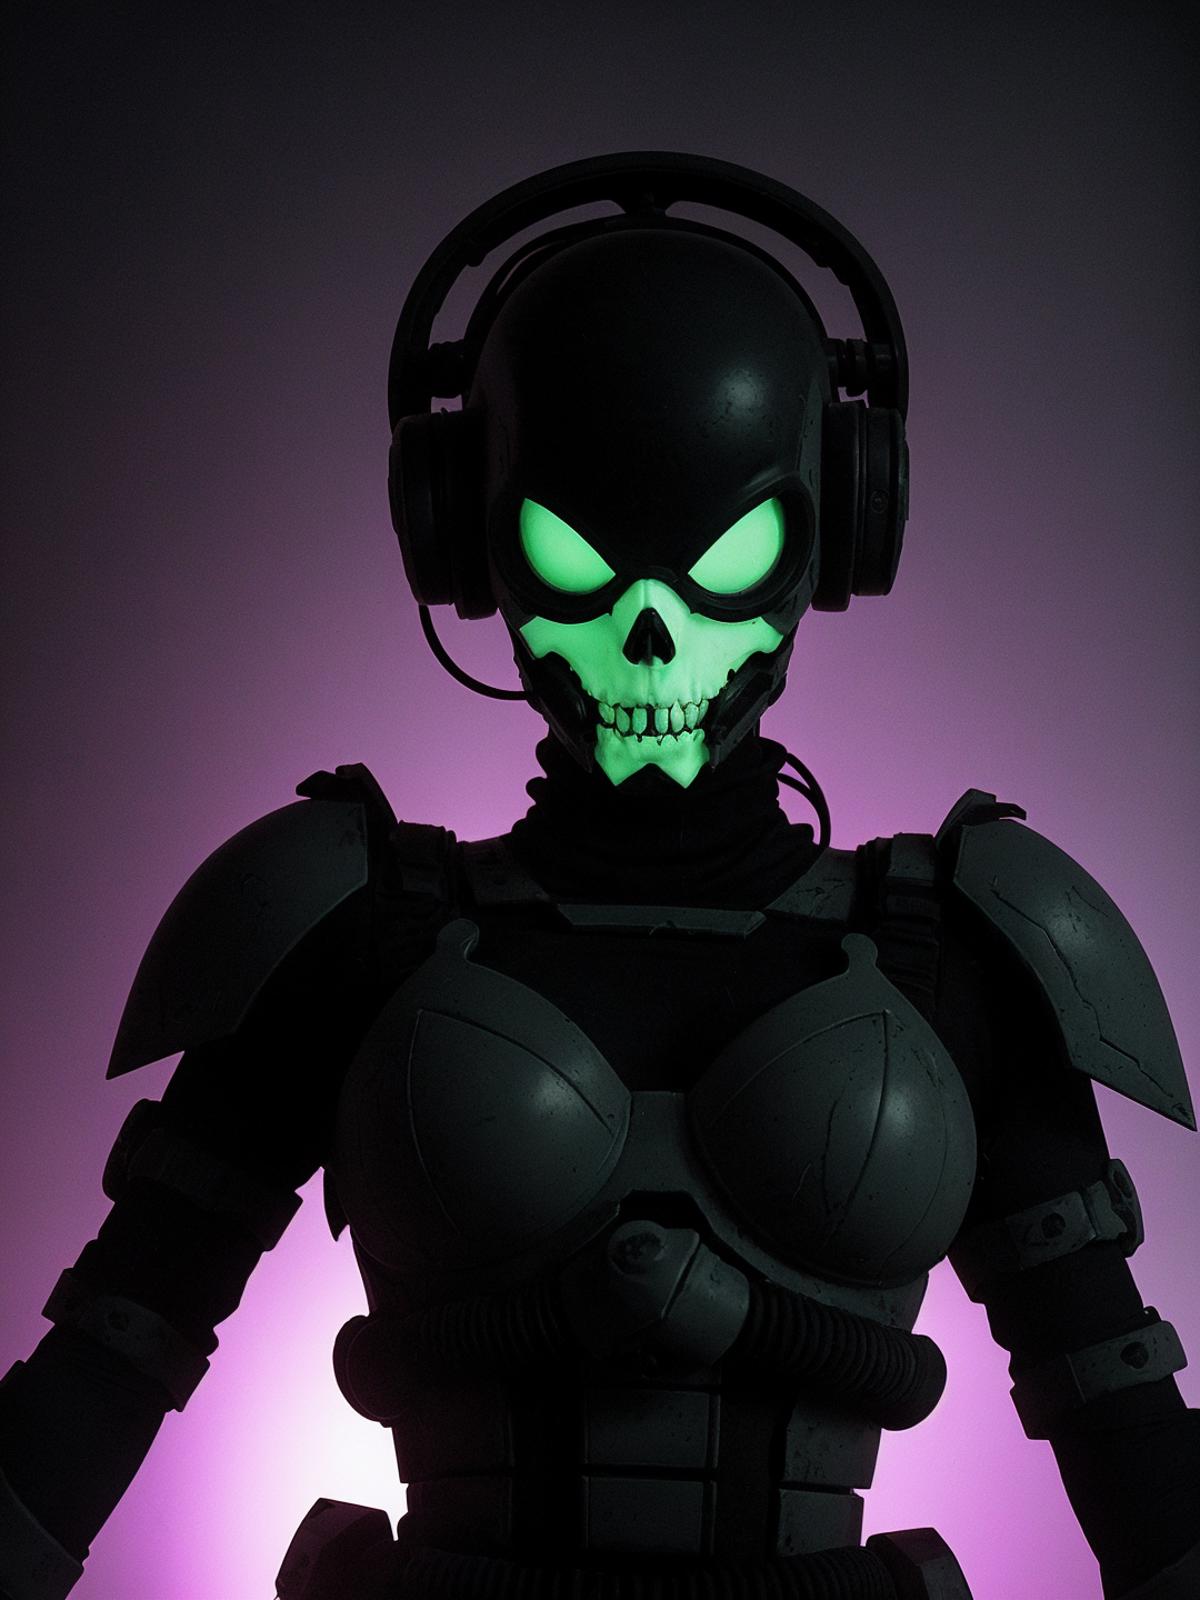 A skeleton with green glowing eyes and a headset on its head.